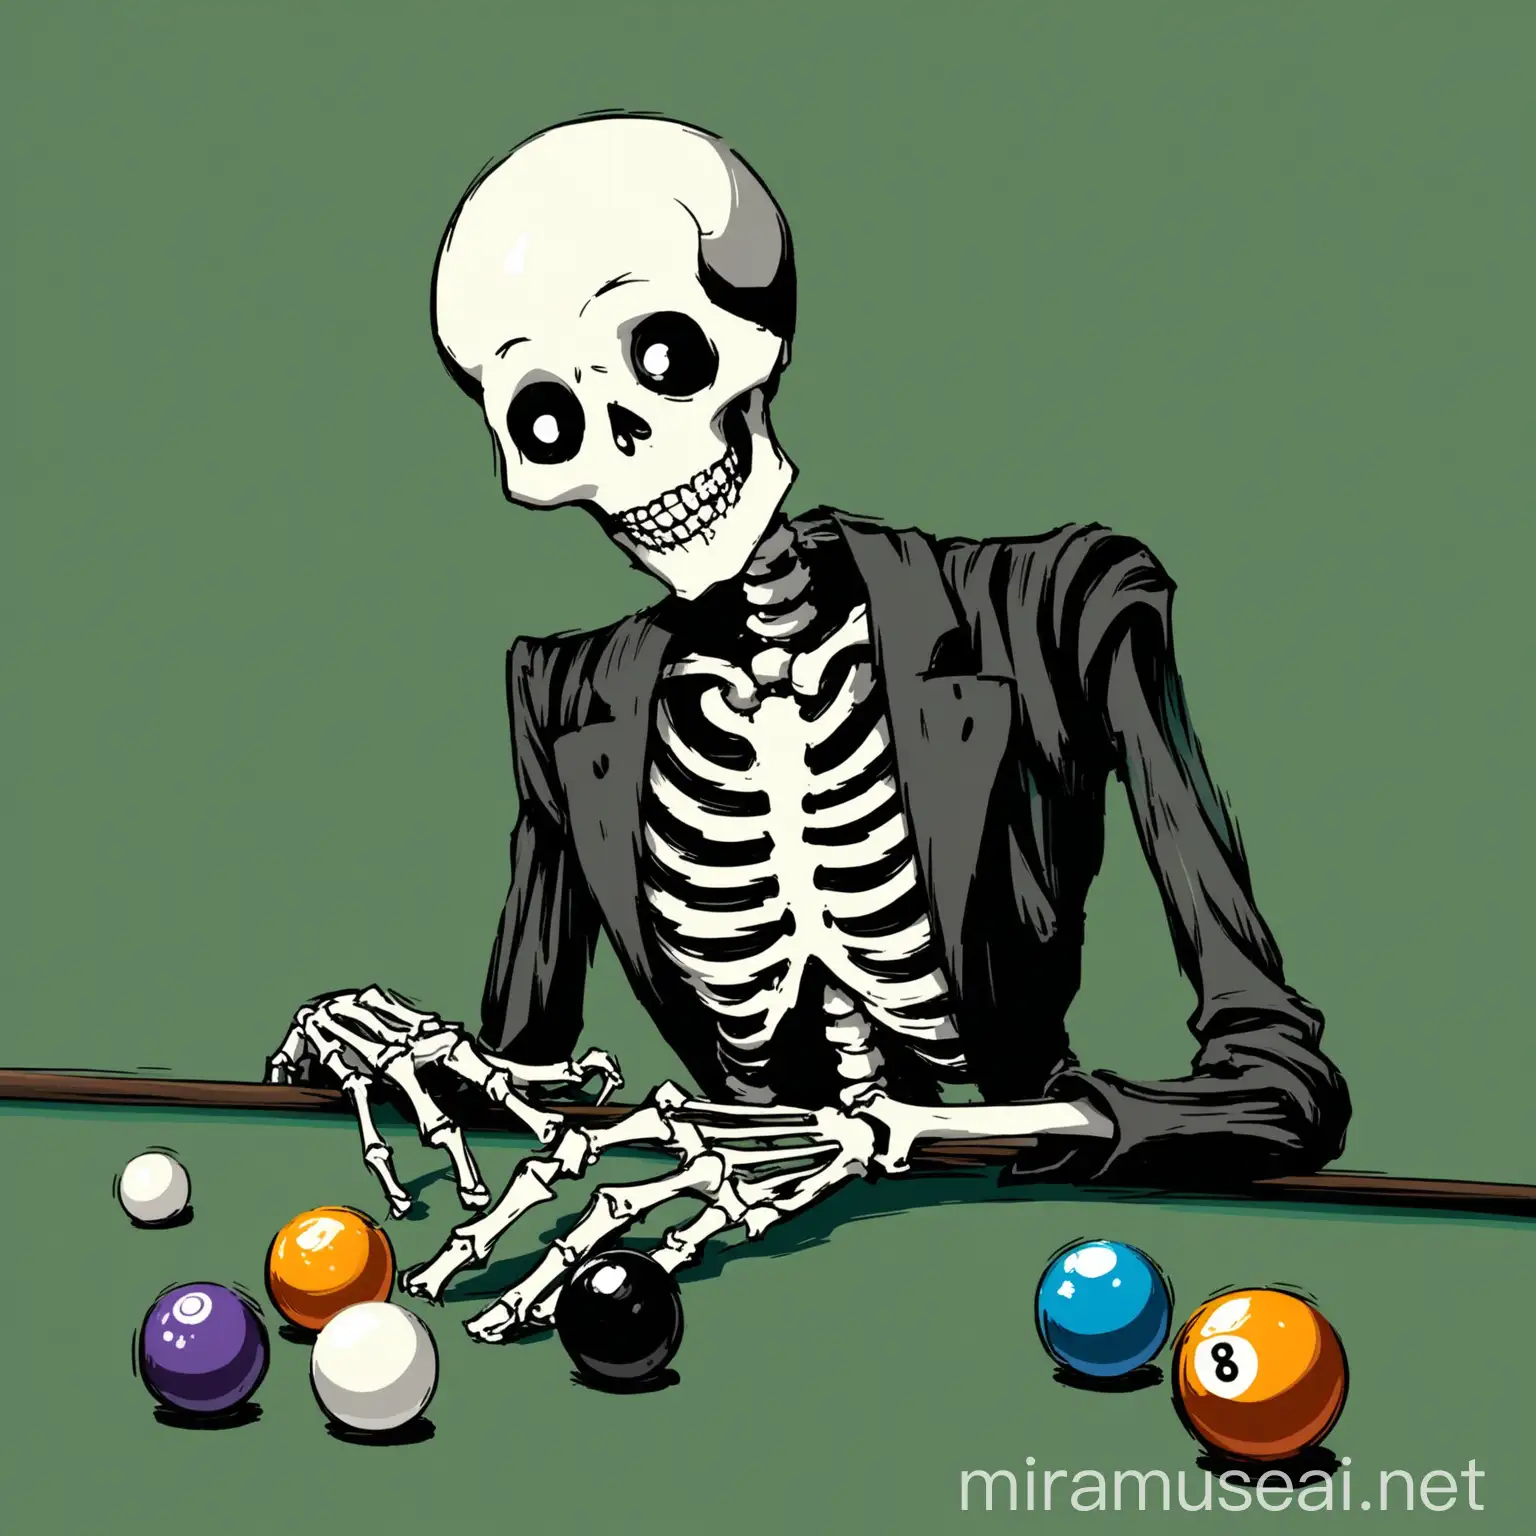 A friendly skeleton holding an eight ball